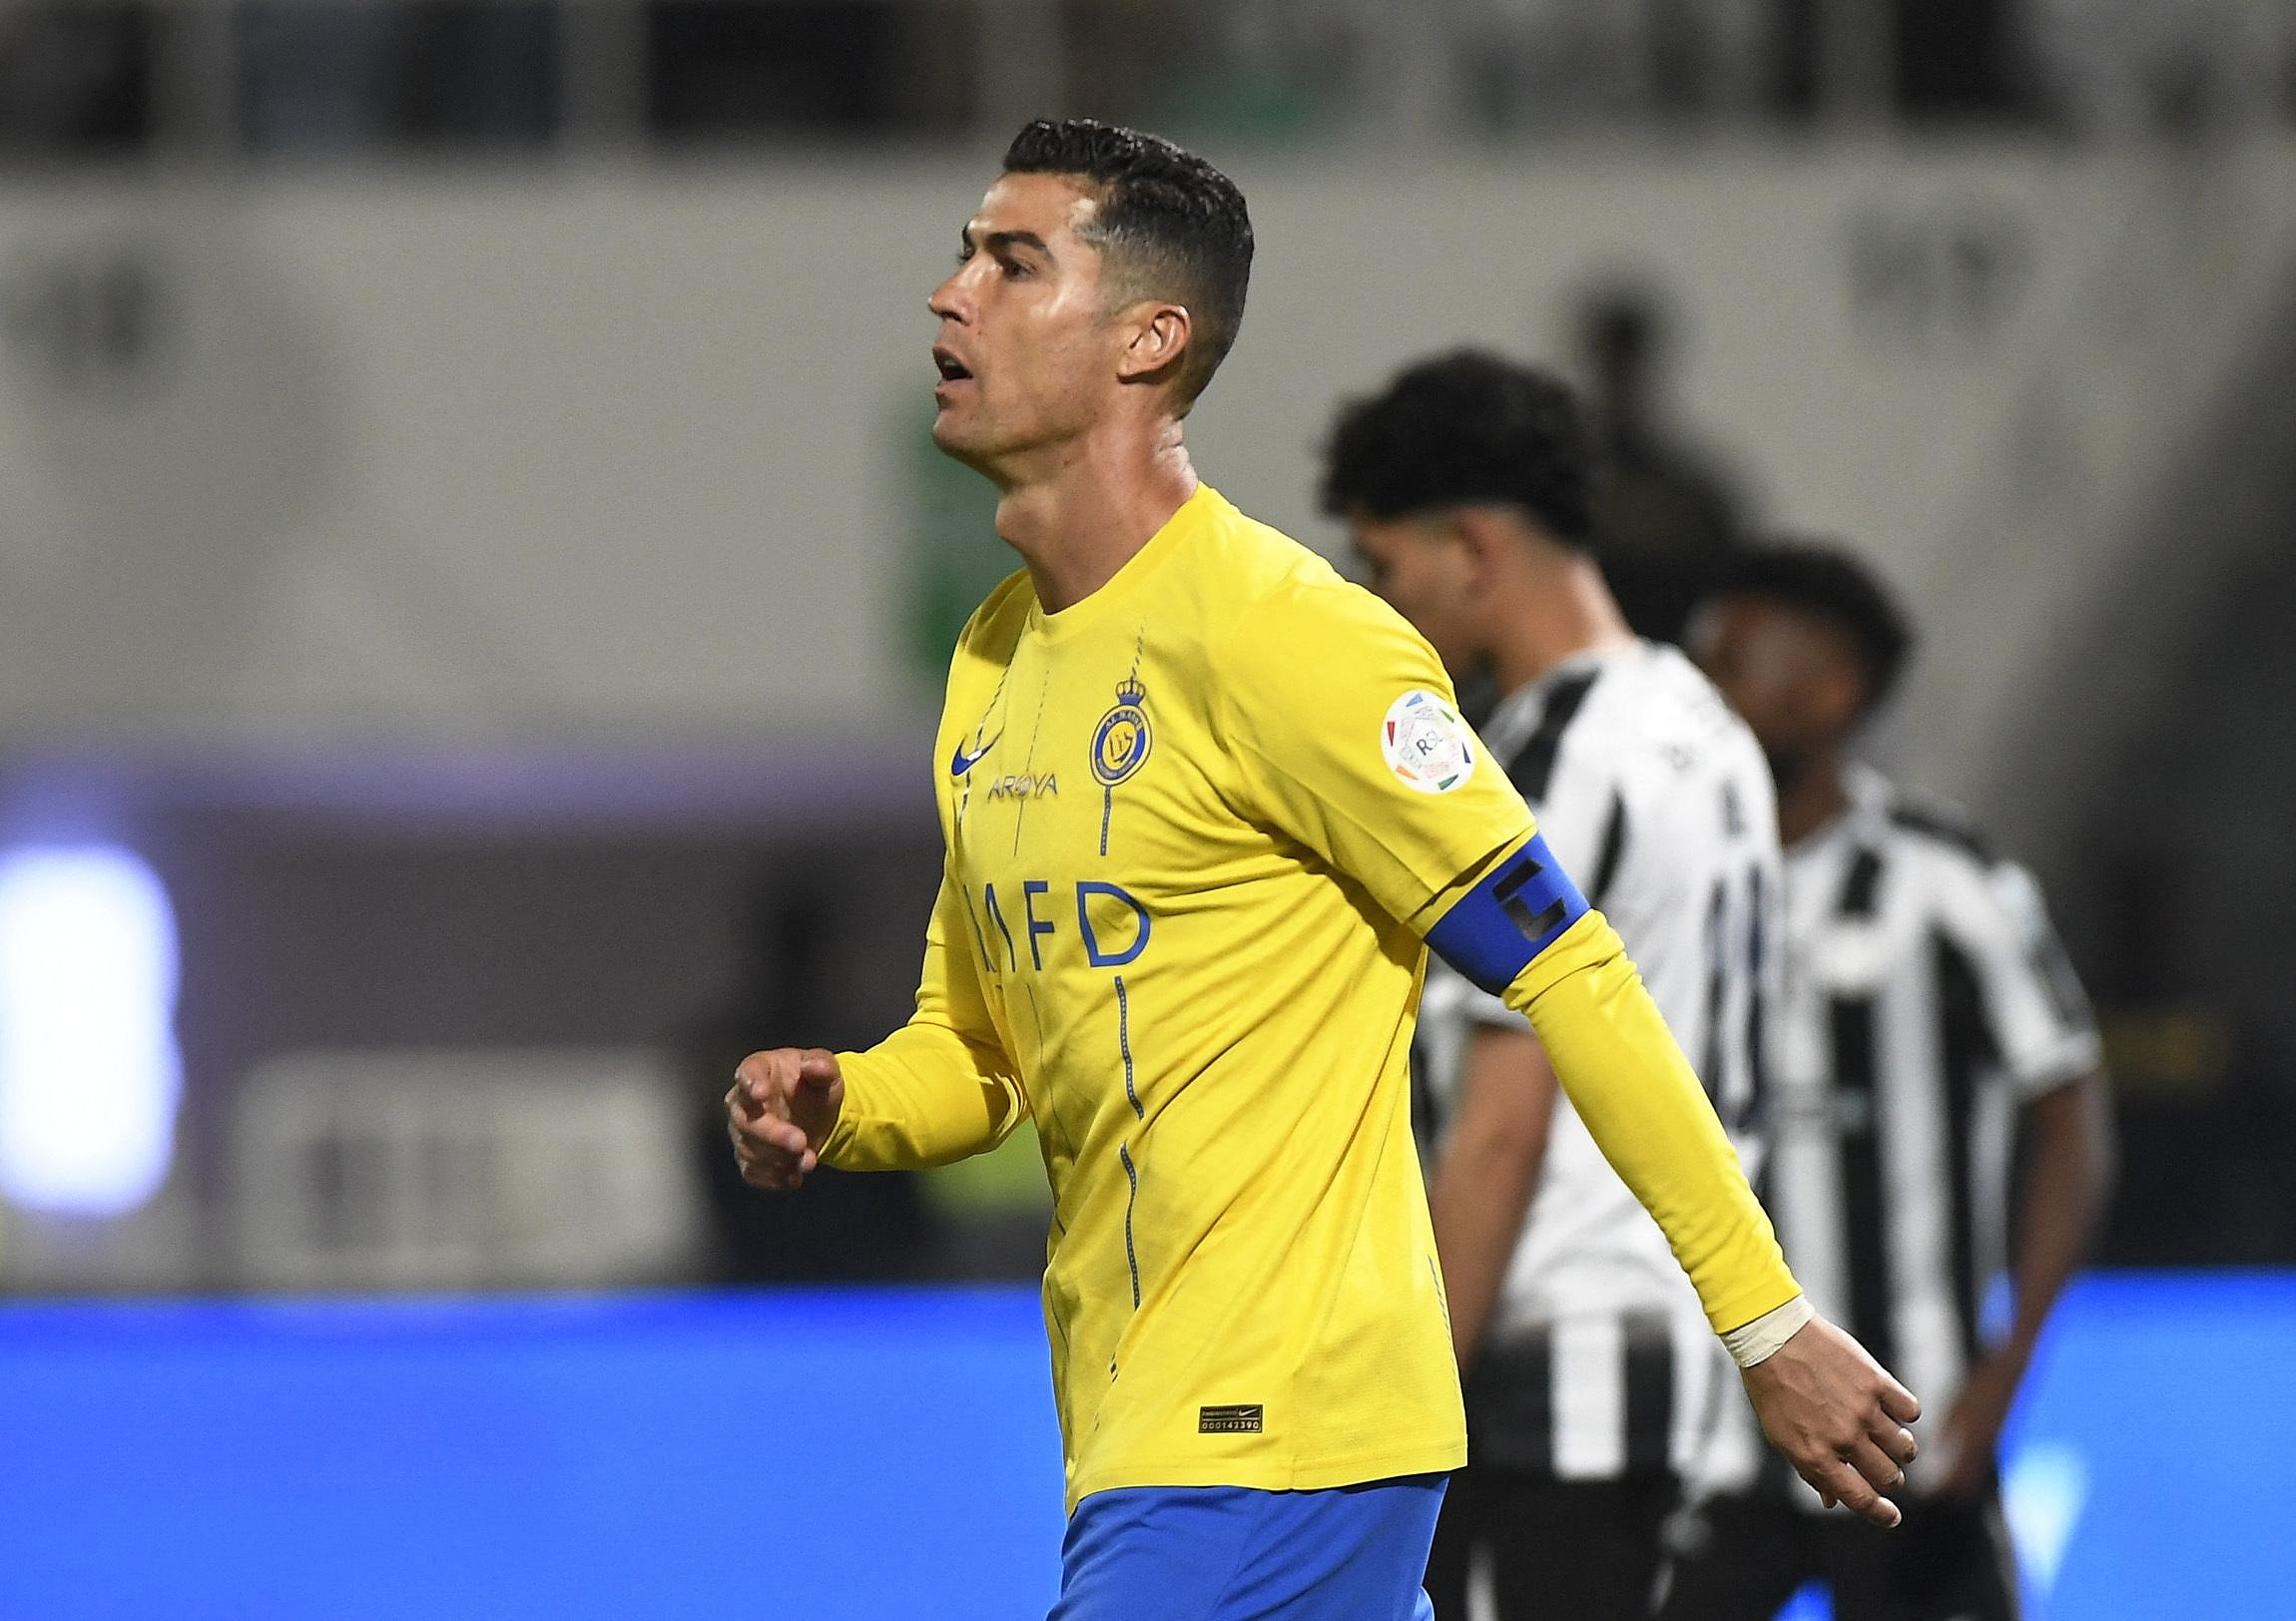 Football: the Saudi Federation will open an investigation into Ronaldo after an obscene gesture towards the public